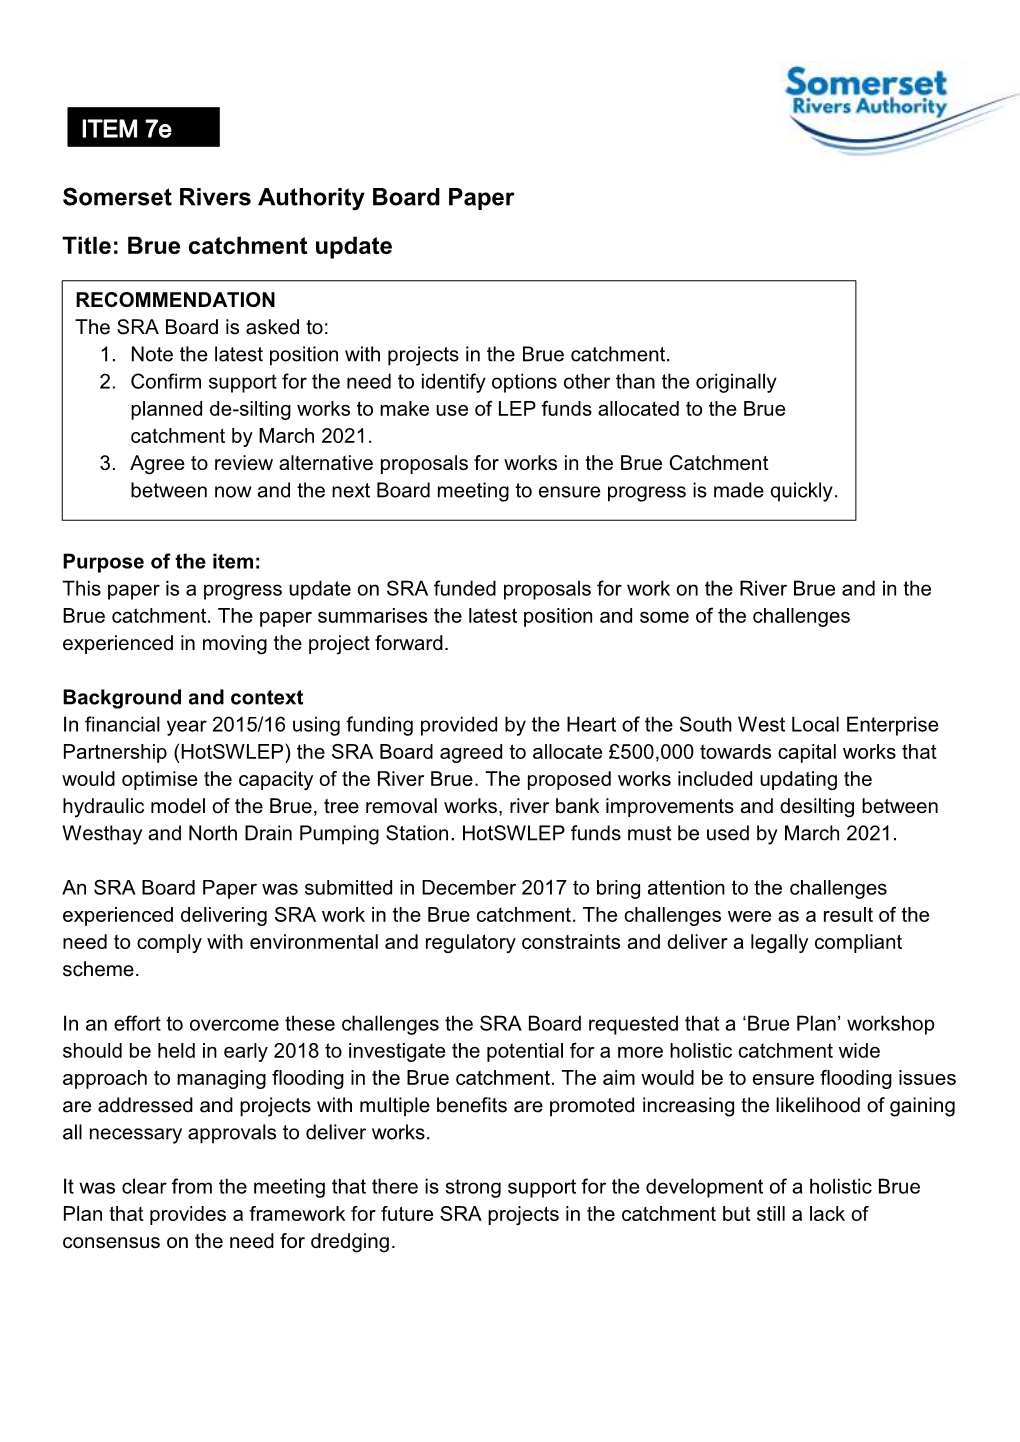 Somerset Rivers Authority Board Paper Title: Brue Catchment Update